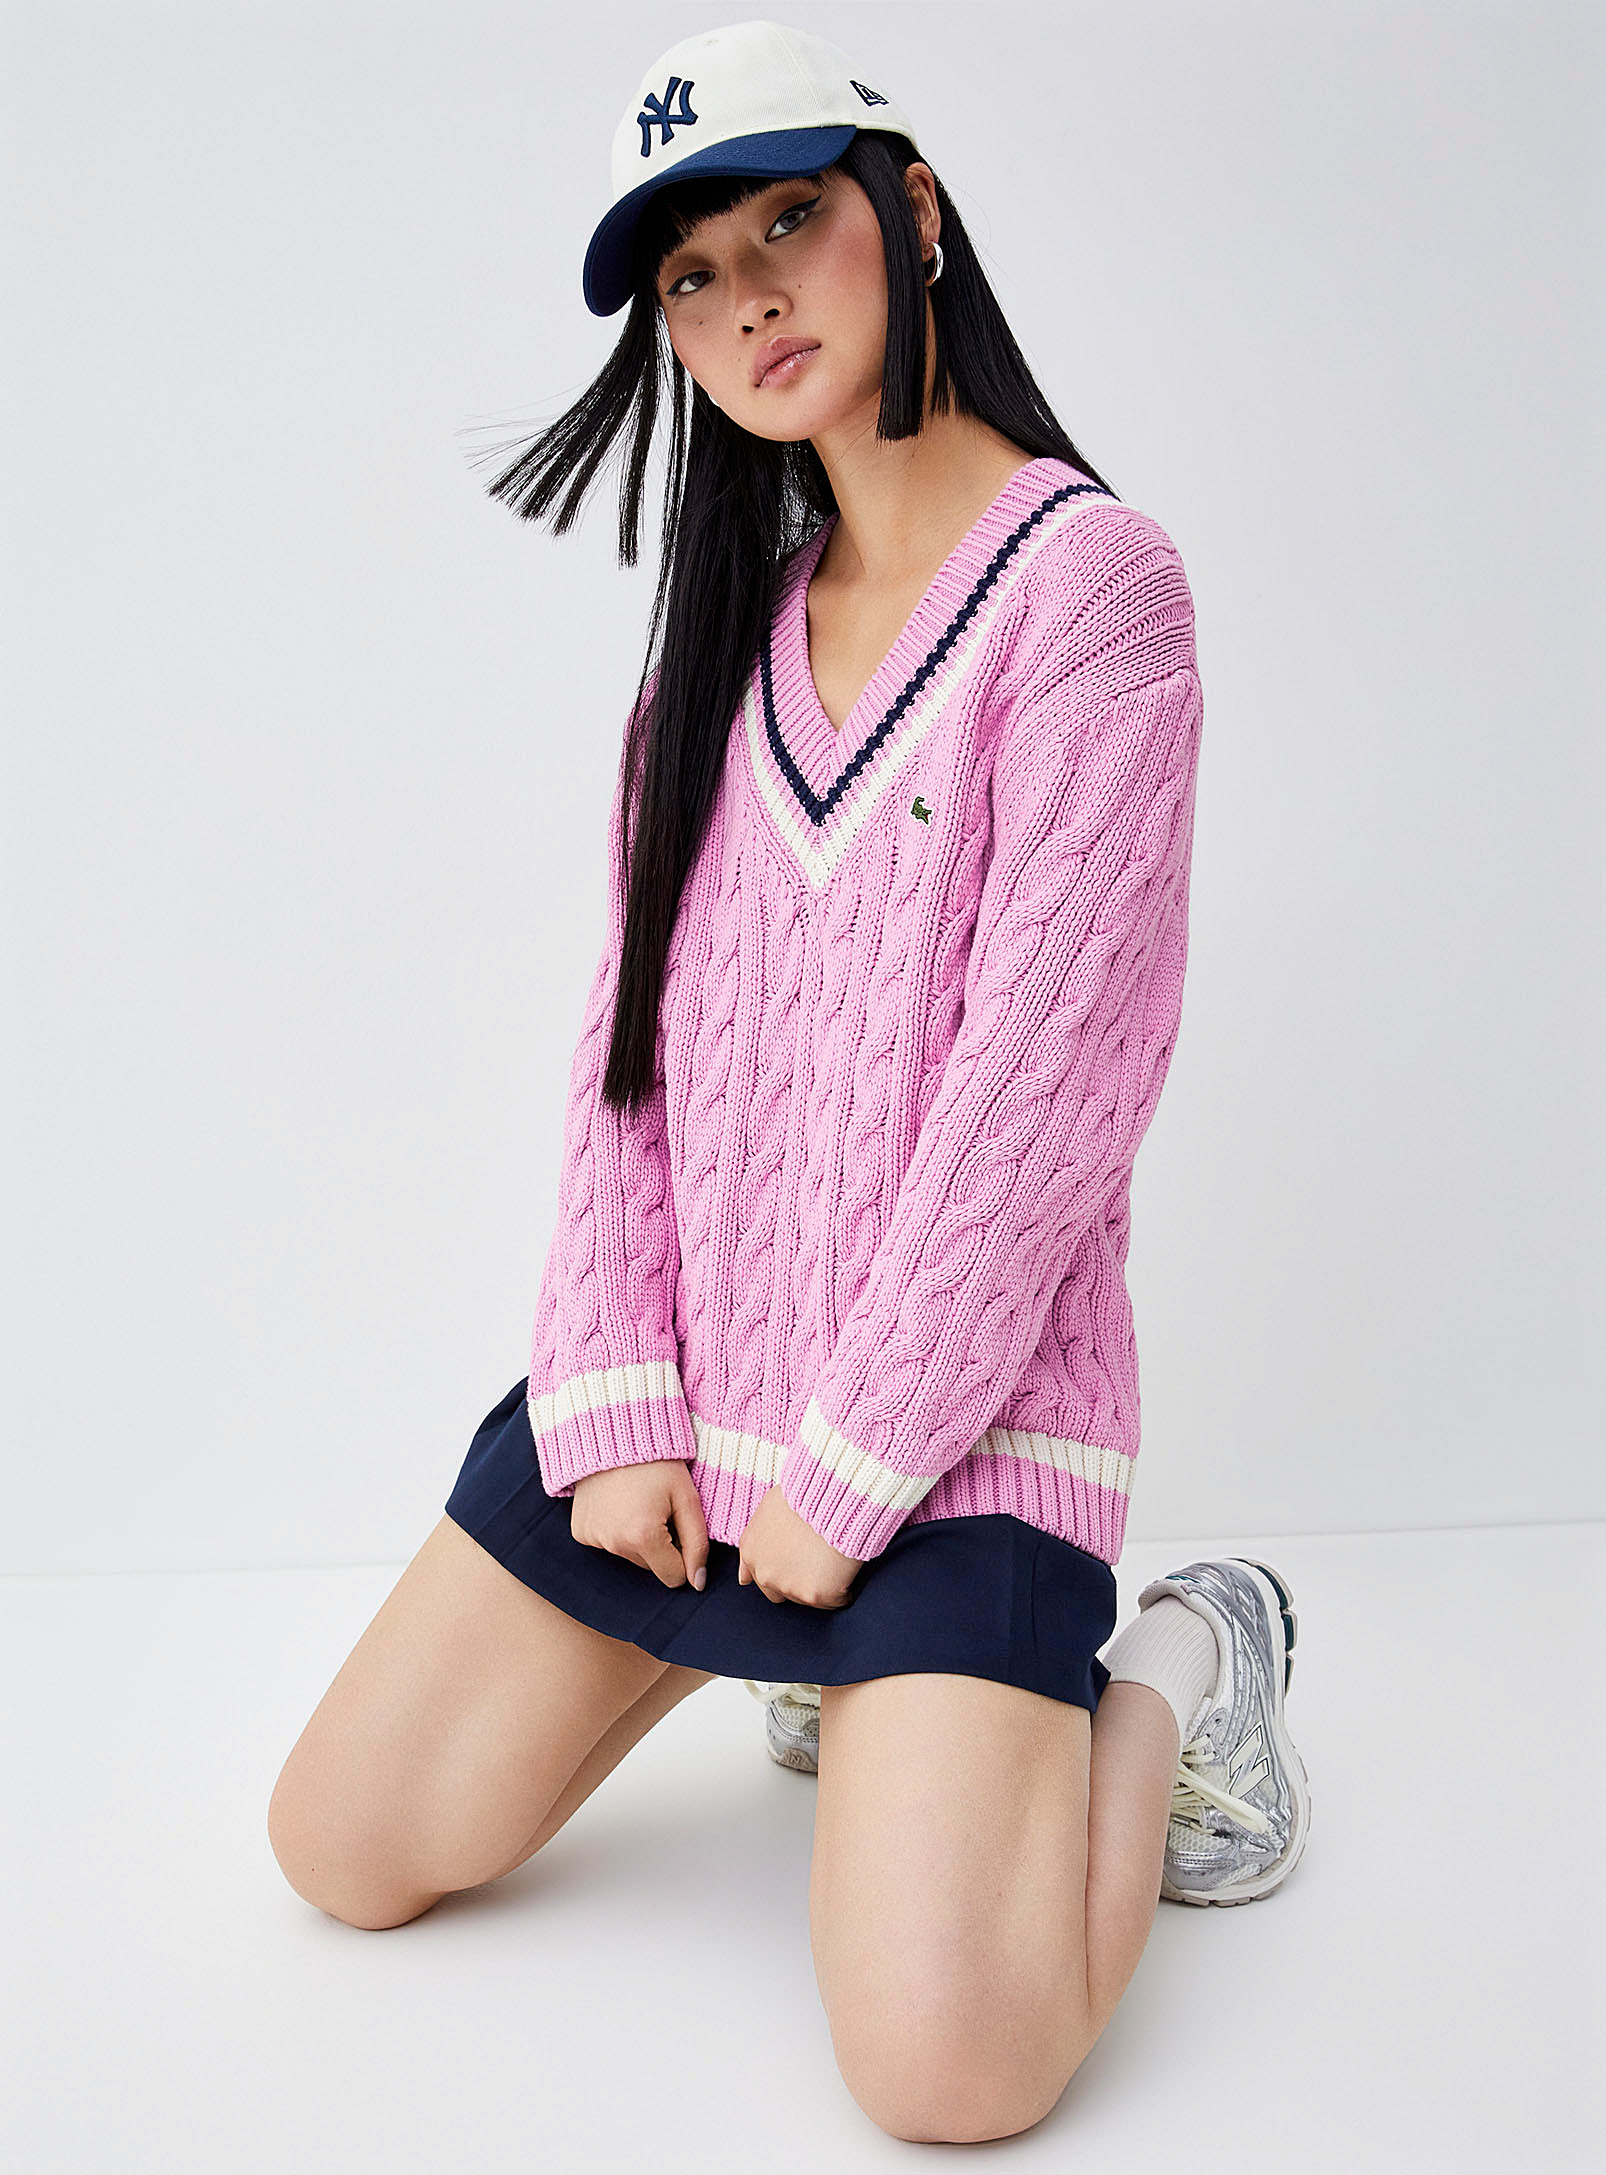 Lacoste - Women's Striped cables sweater